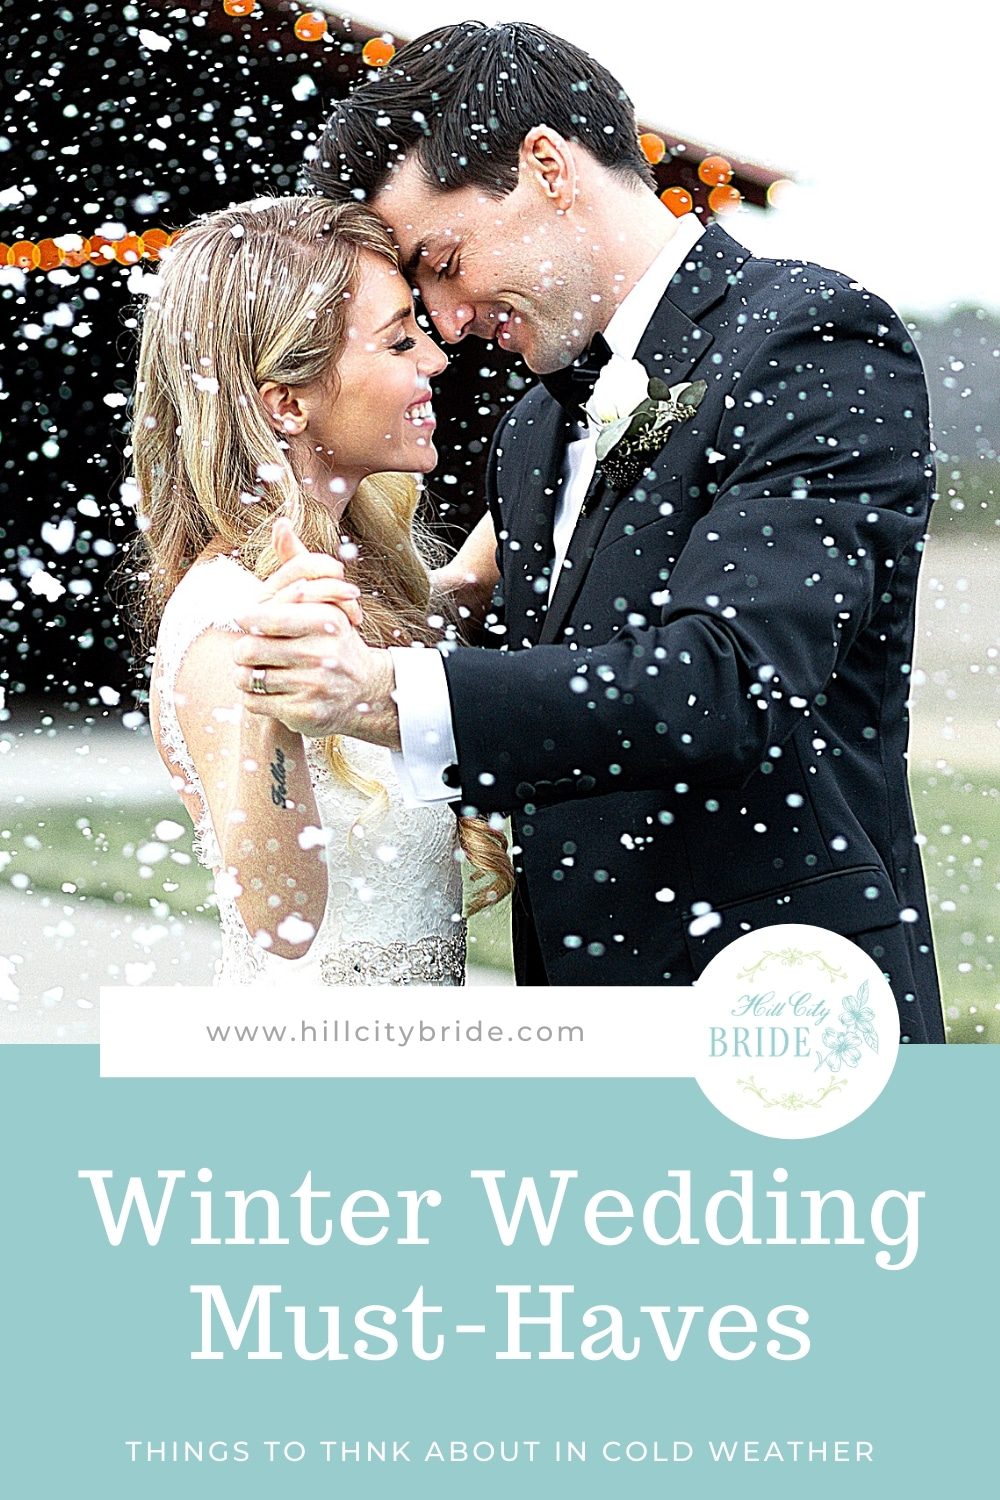 Must Haves for a Winter Wedding